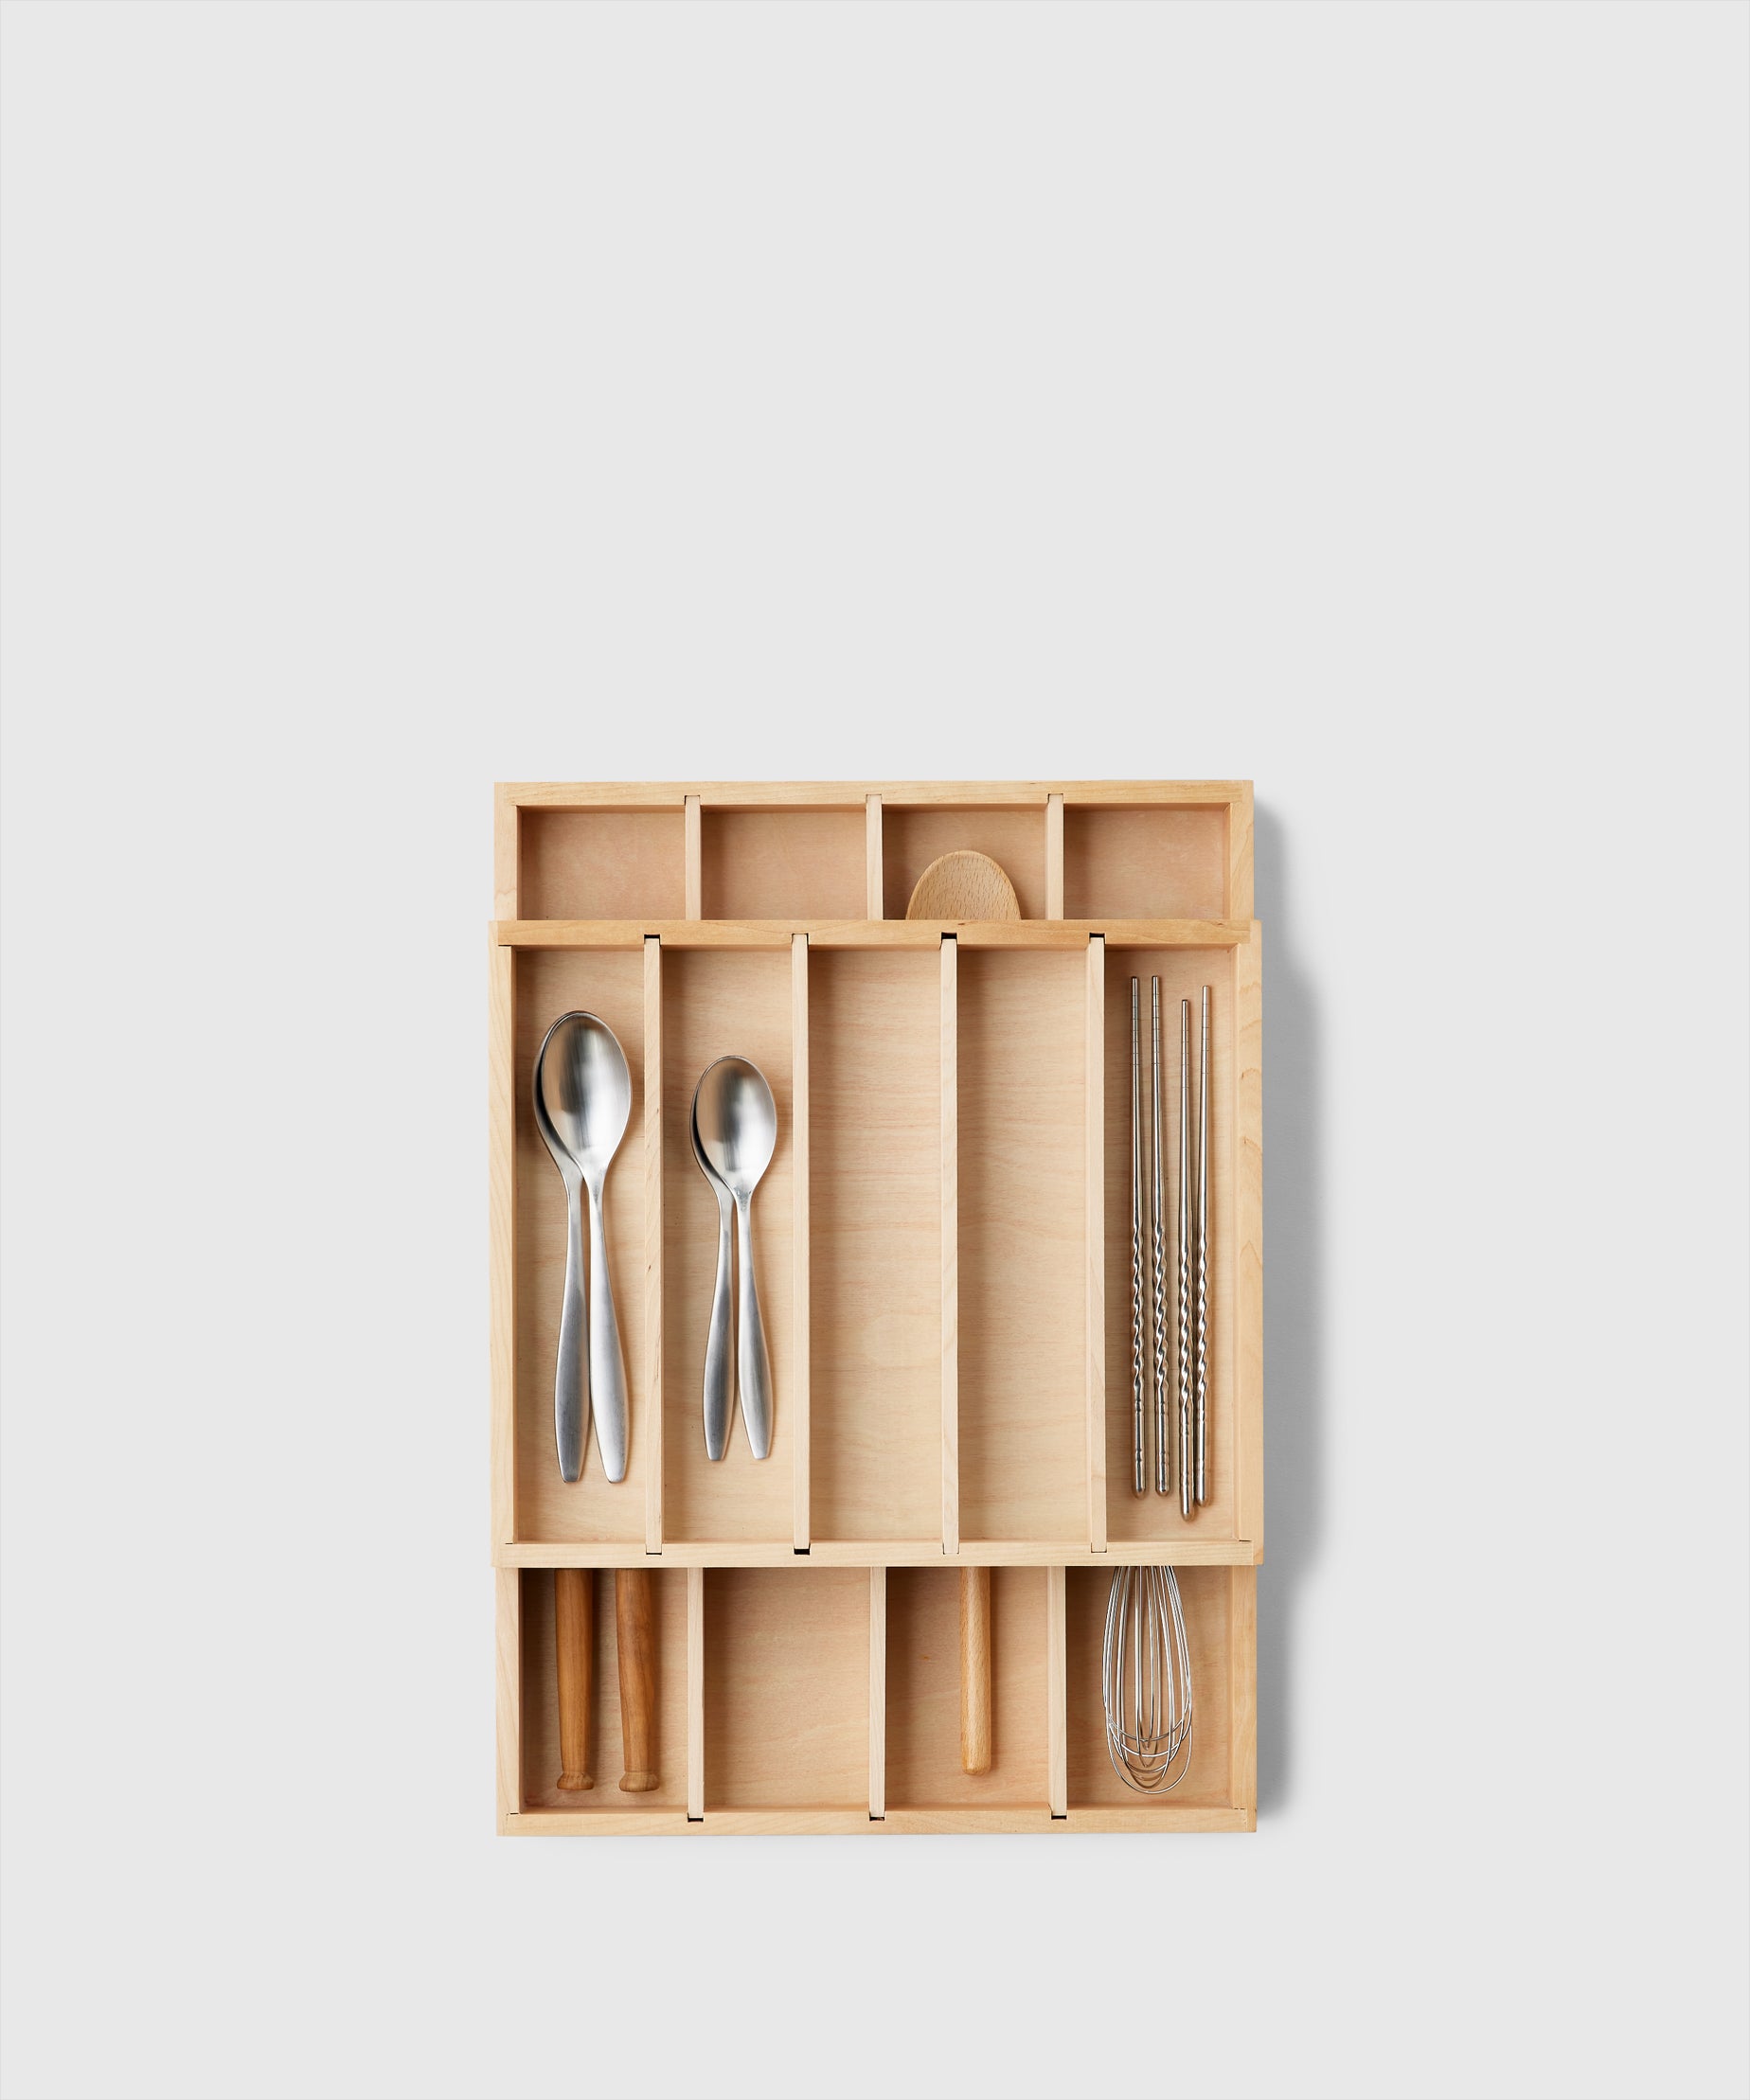 How to Store Kitchen Tools and Flatware